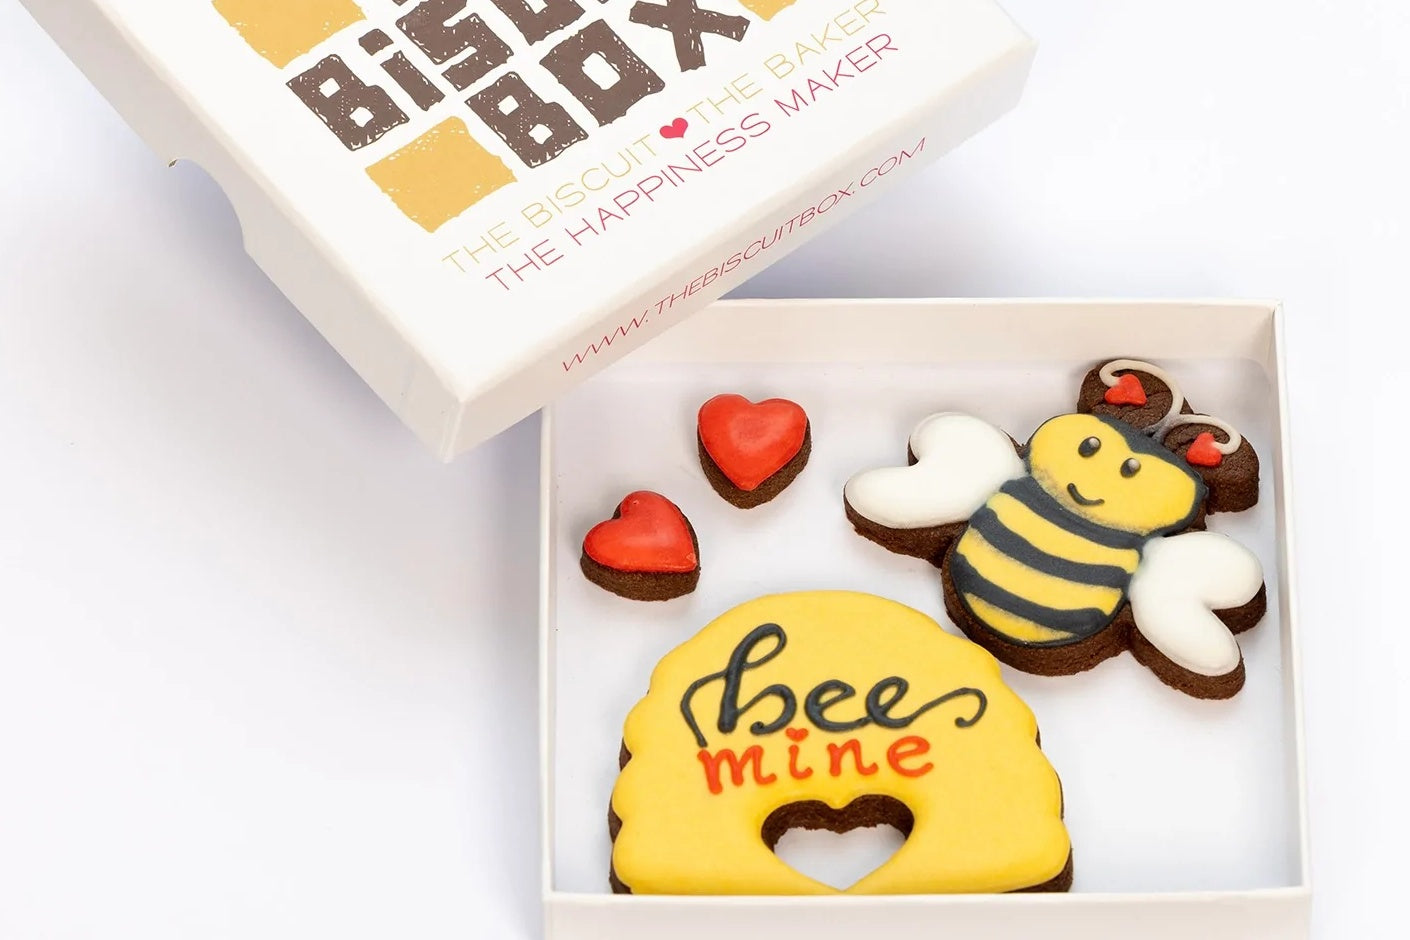 bee mine biscuits for valentines day. yellow bee and beehive biscuits in a box